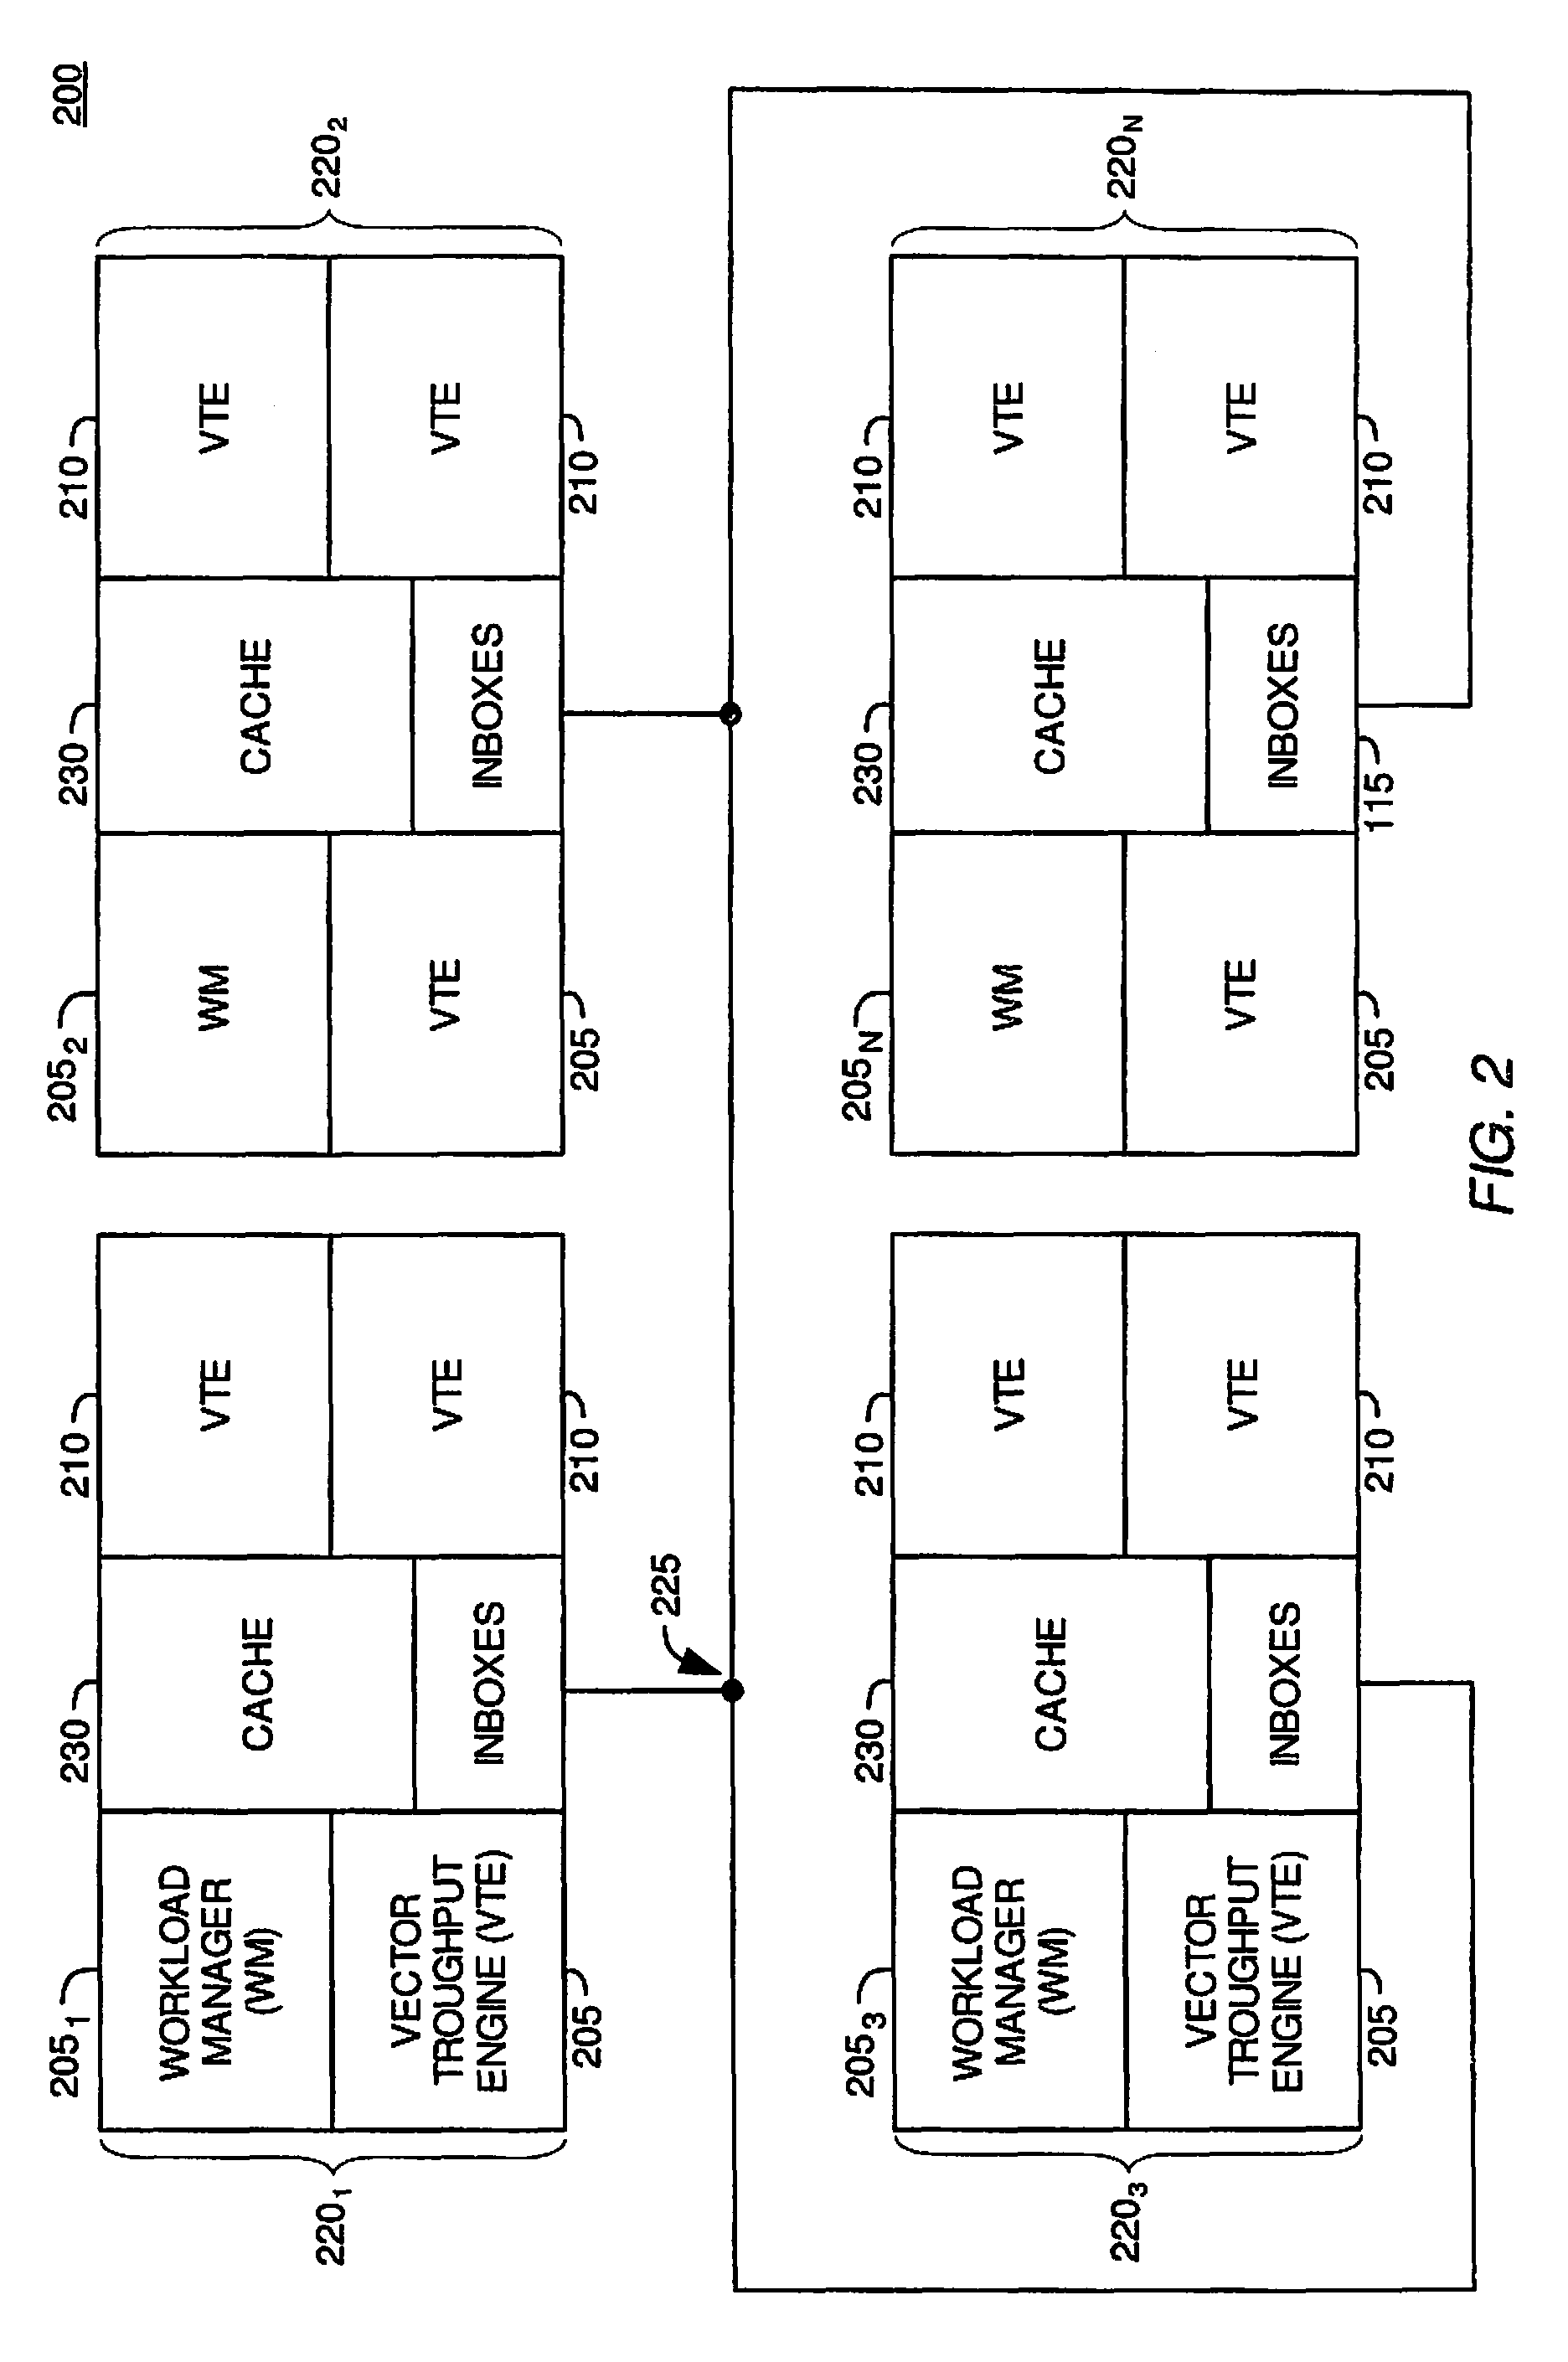 Method for reducing network bandwidth by delaying shadow ray generation